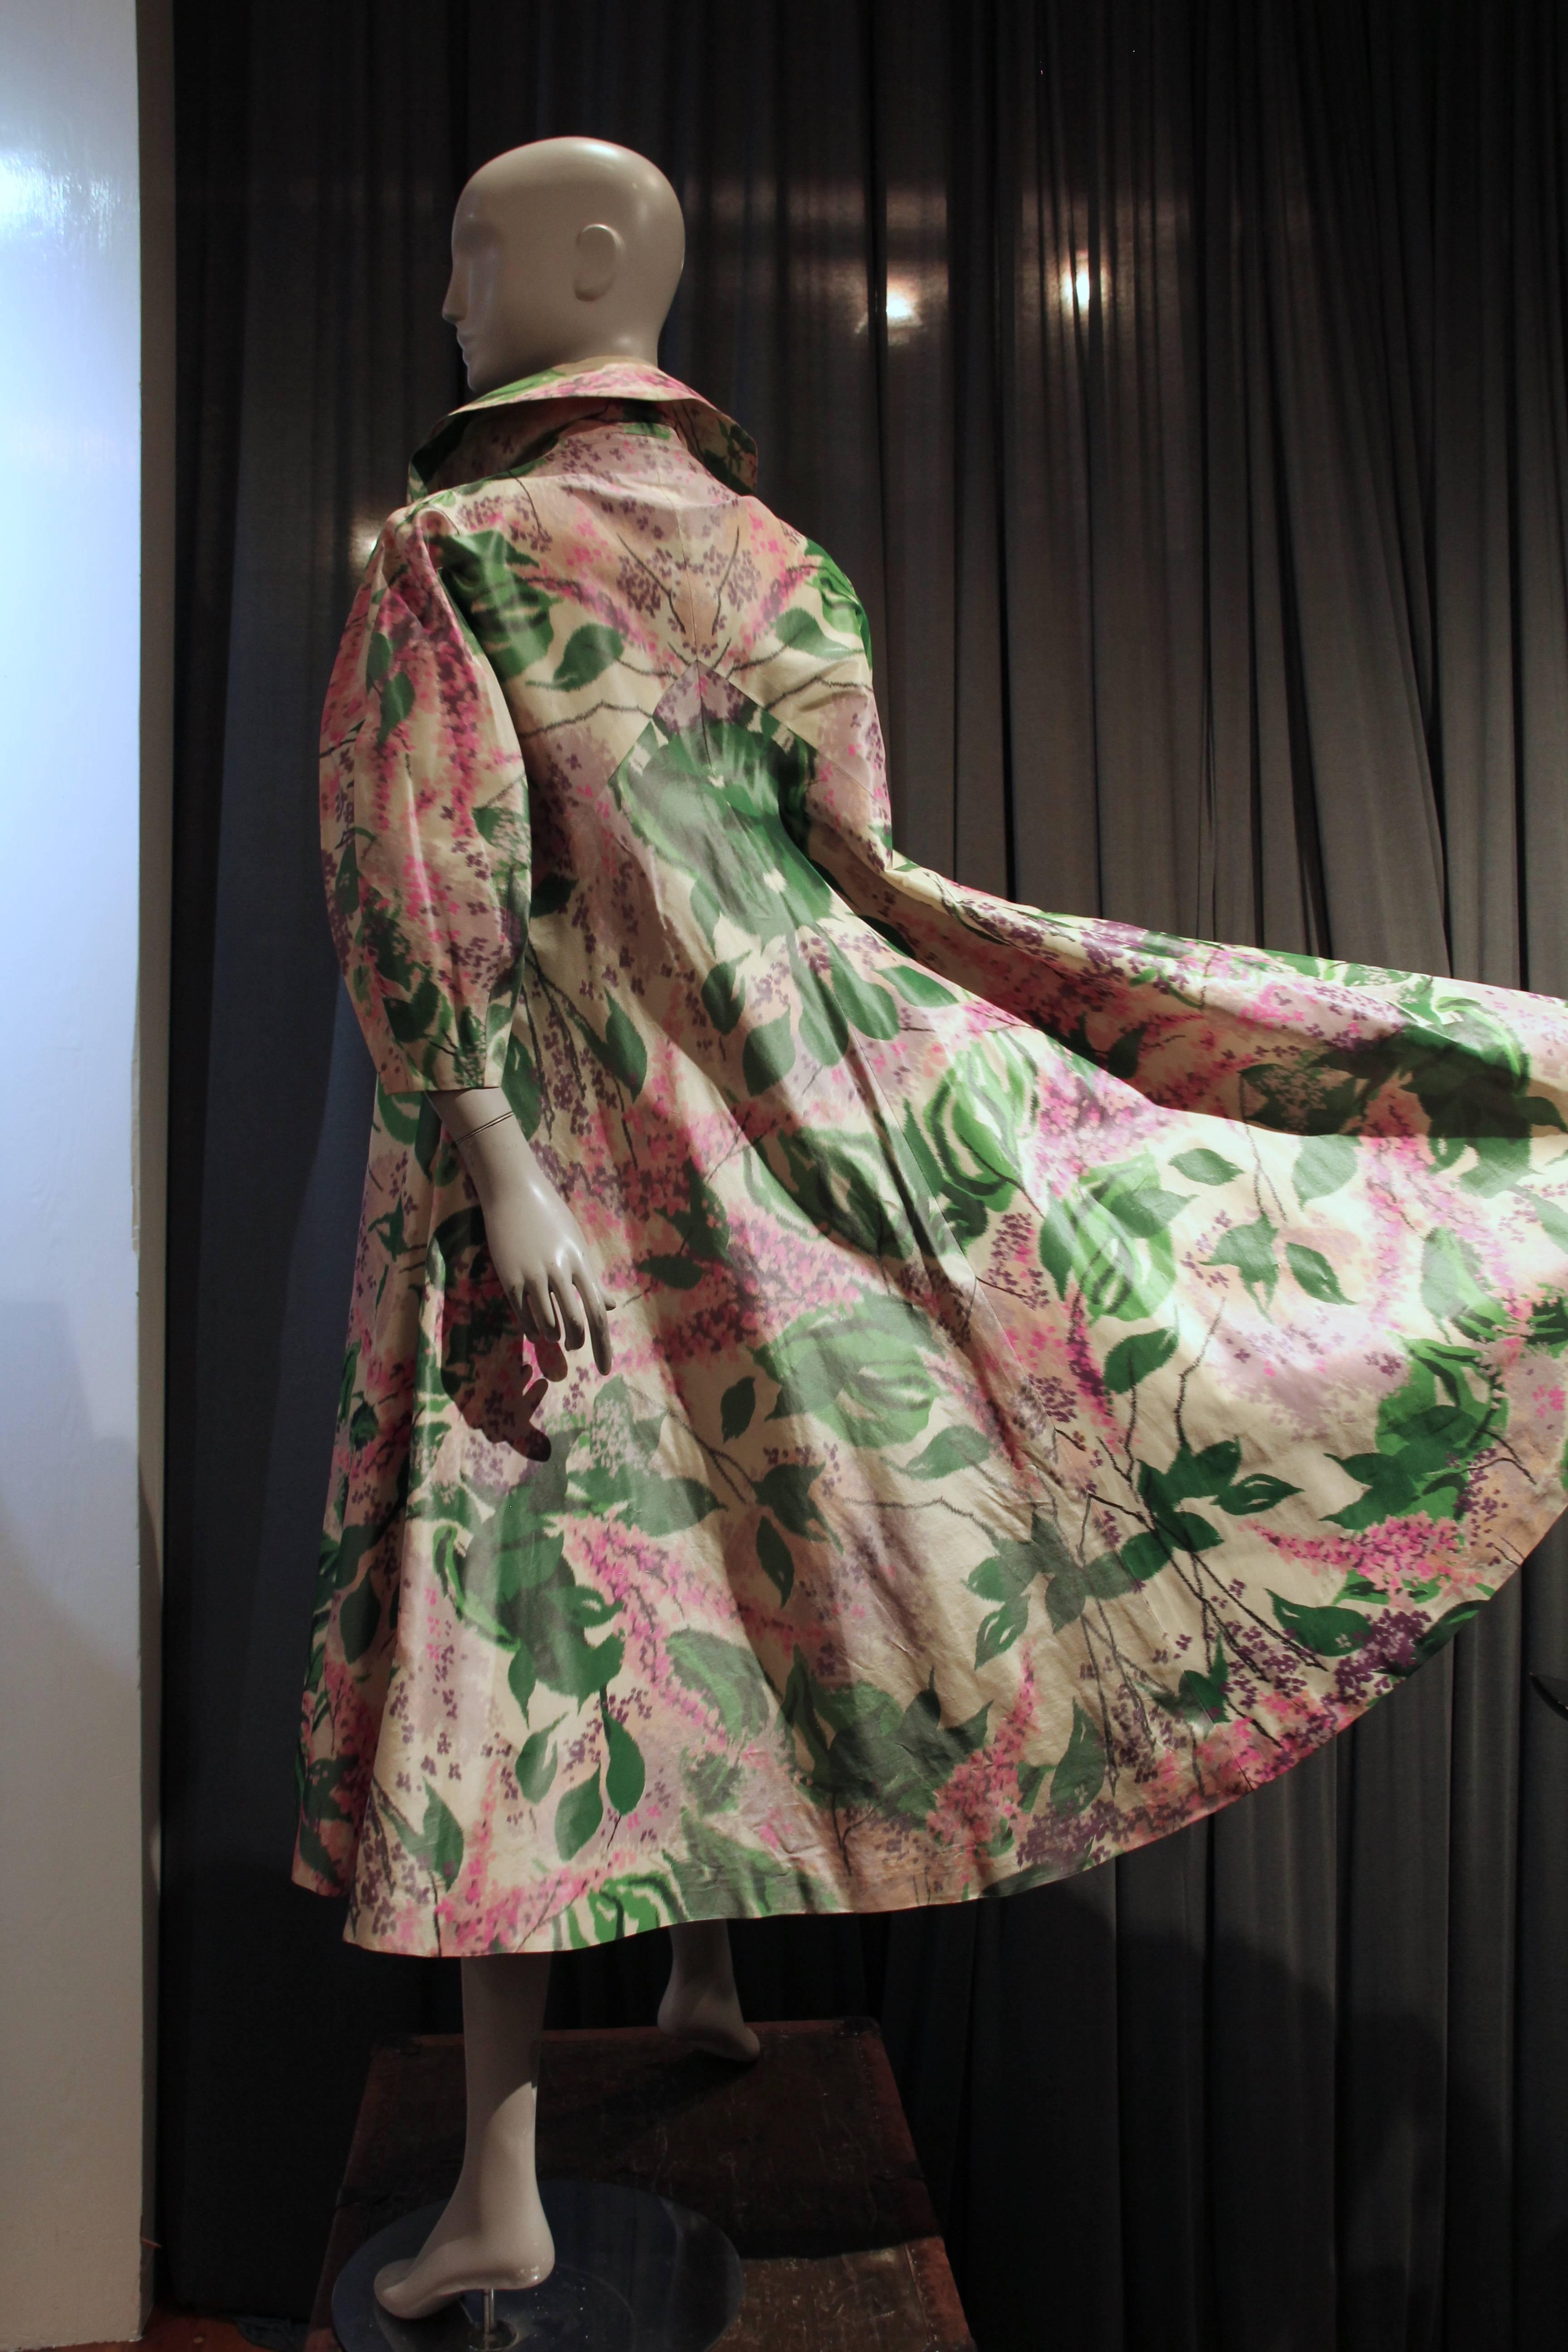 An absolutely divine 1950s Irene silk opera coat in a full swing style. Mid-calf or nearly ankle length with a full rounded sleeve silhouette, shawl collar and 3/4 length sleeves.  It screams out for opera gloves to match the heavenly abstract lilac